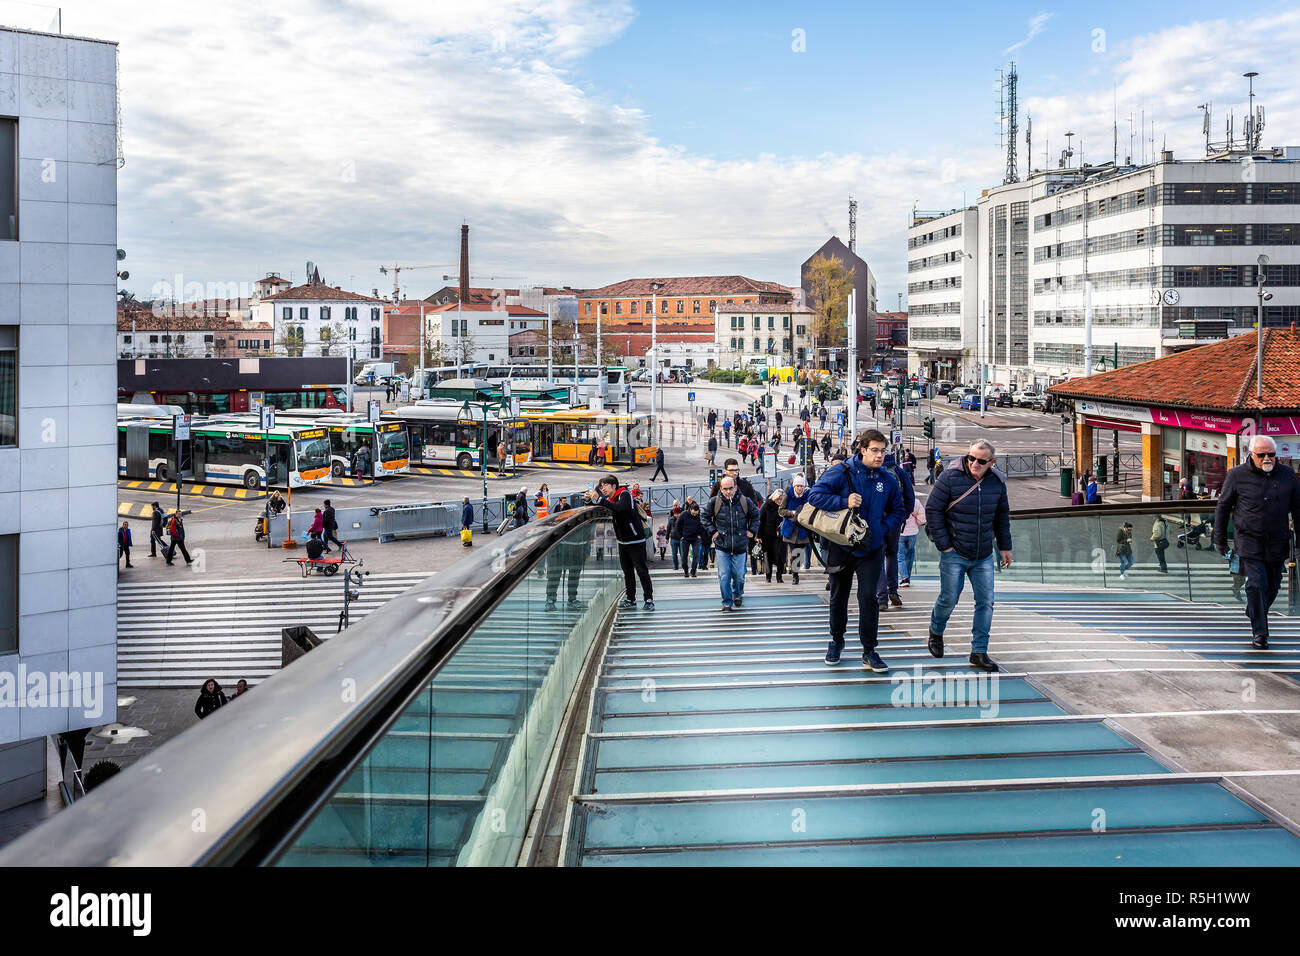 View of the bus station at Piazzale Roma  from the glass bridge across the Grand Canal in Venice, Italy on 27 November 2018 Stock Photo